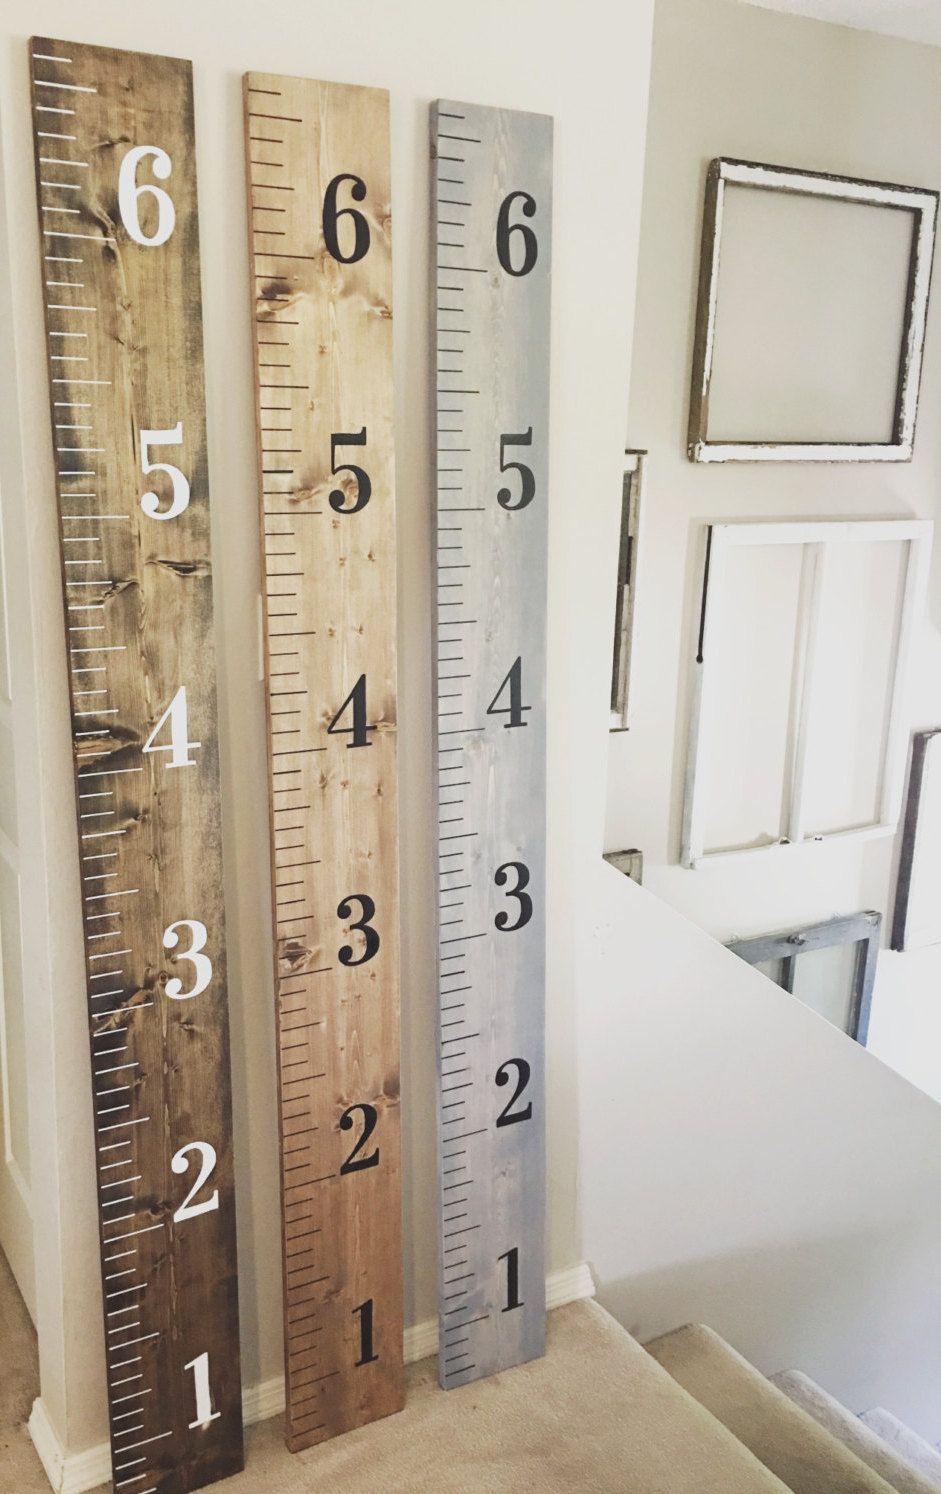 Wood Growth Chart Ruler | Etsy -   19 diy projects With Wood growth charts ideas